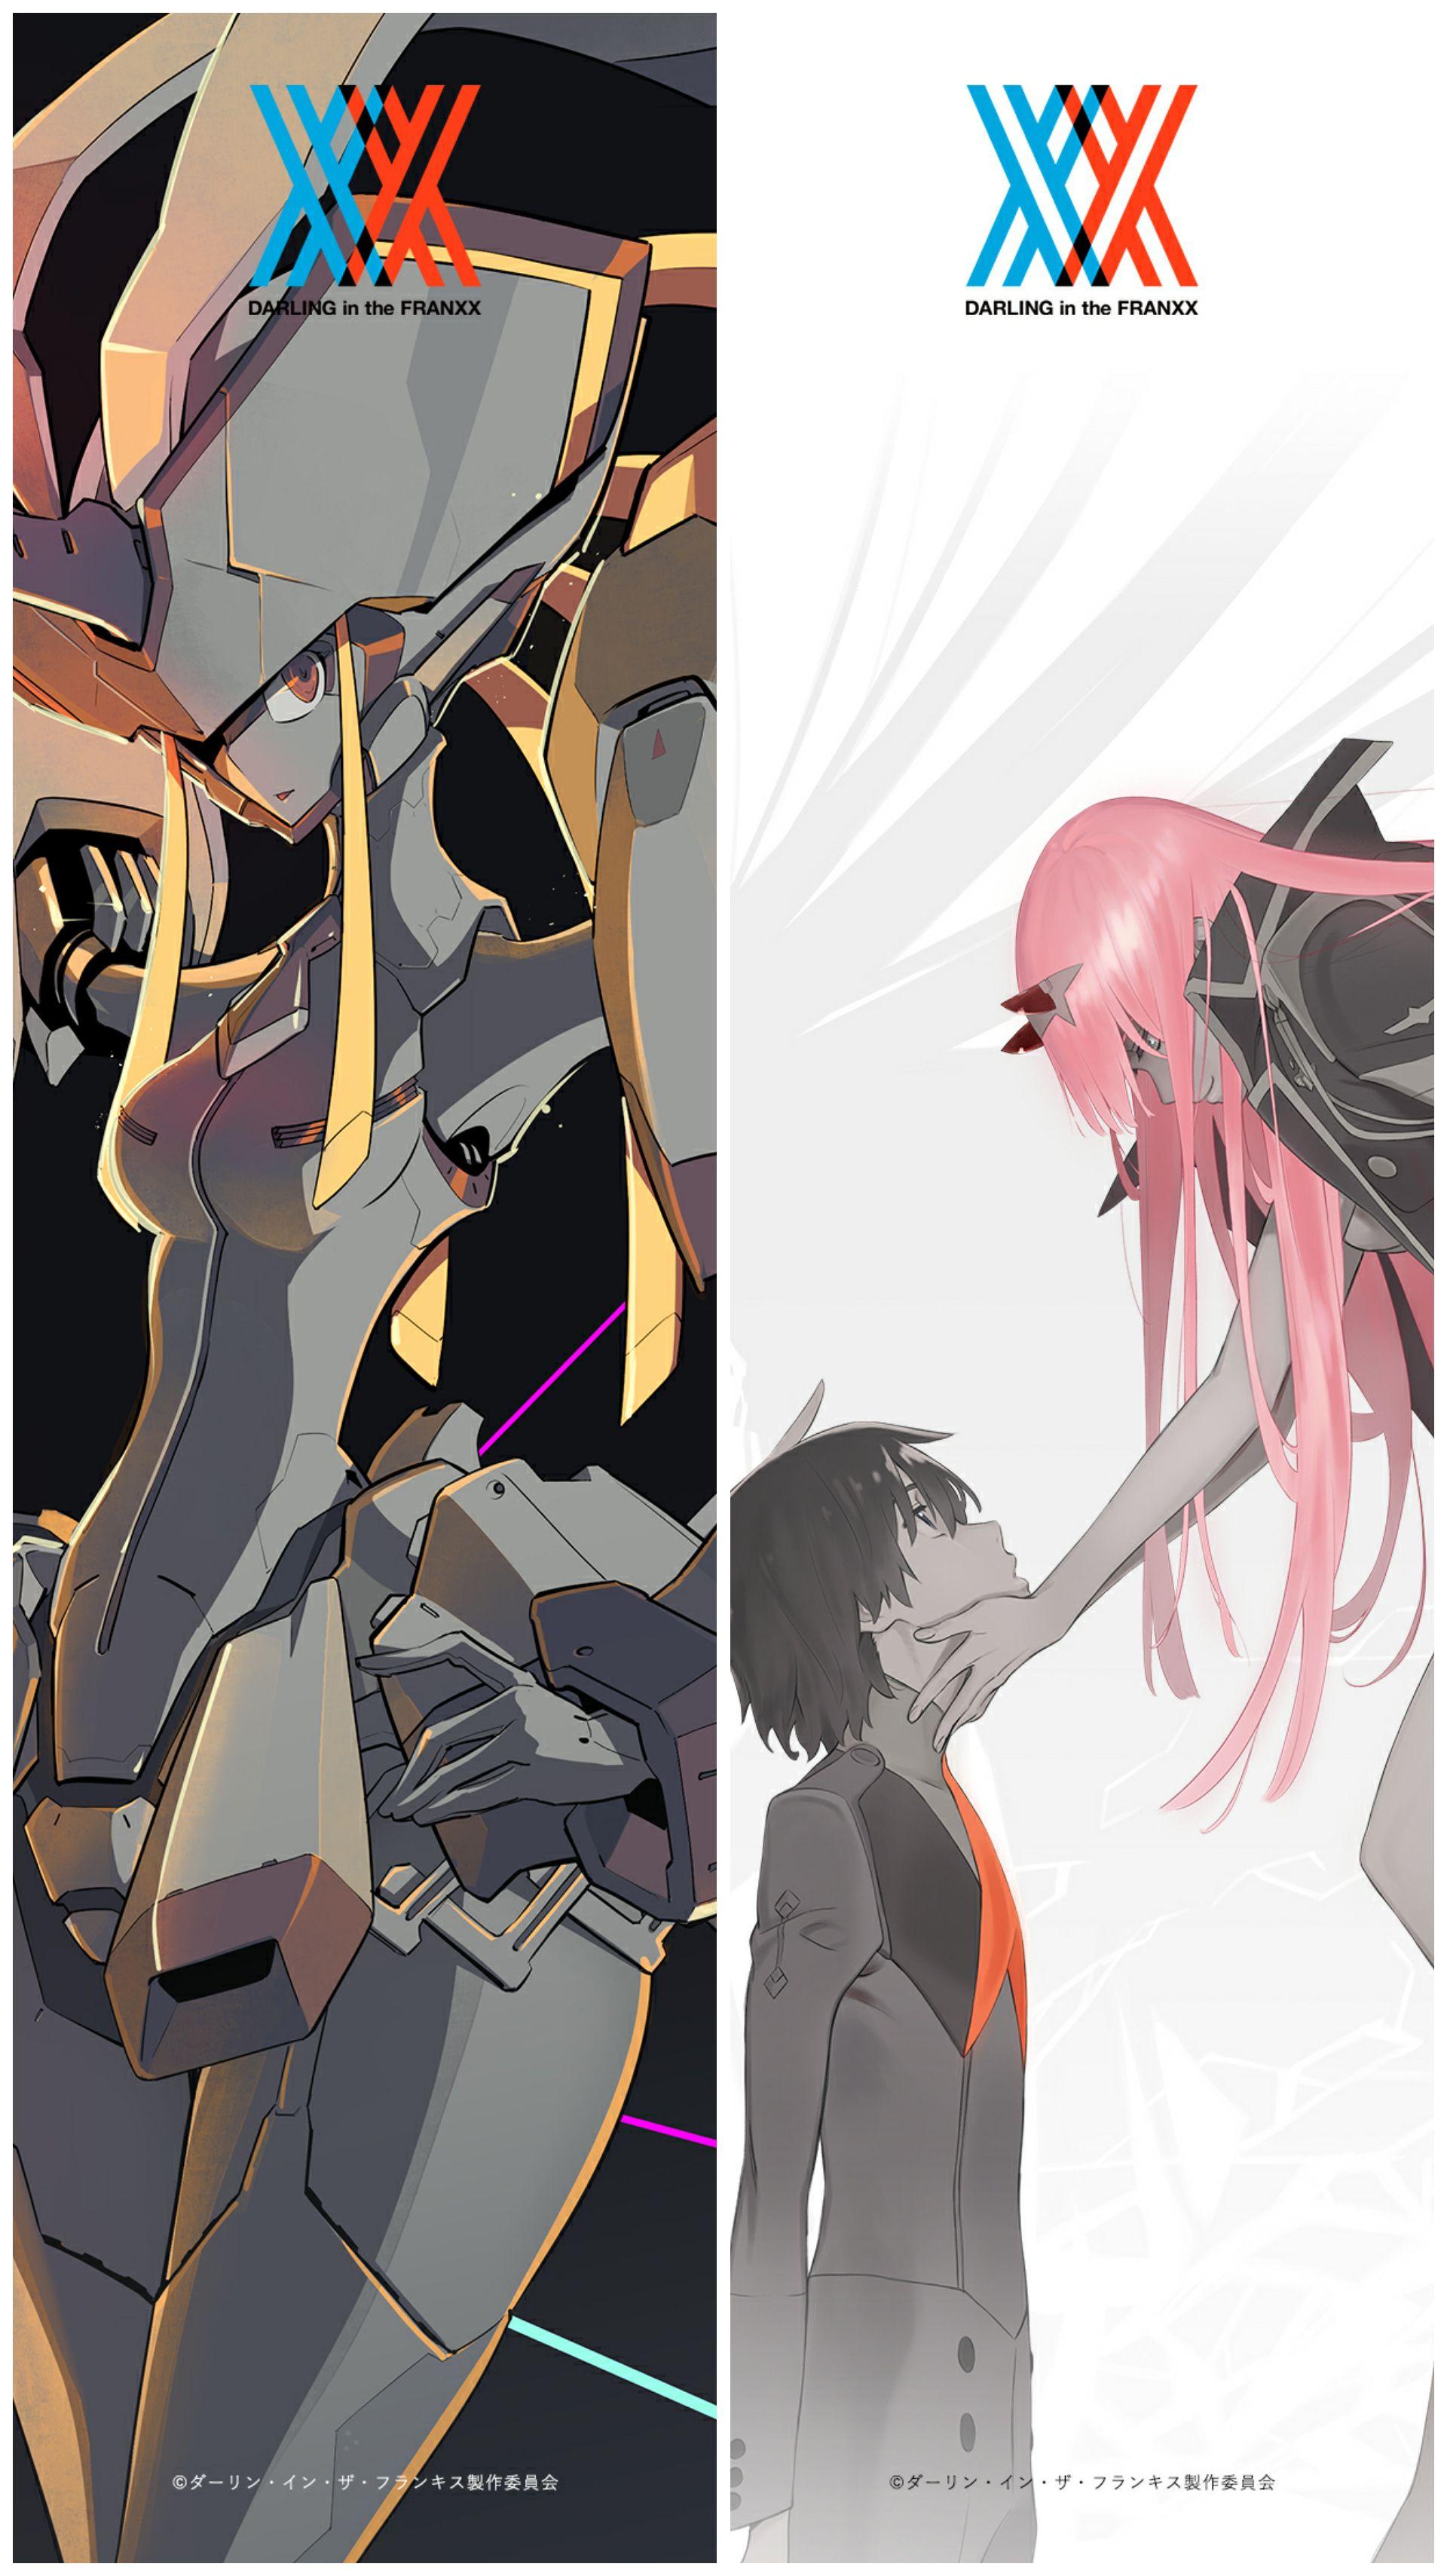 Made a Darling In The Franxx phone wallpaper for anyone who wants